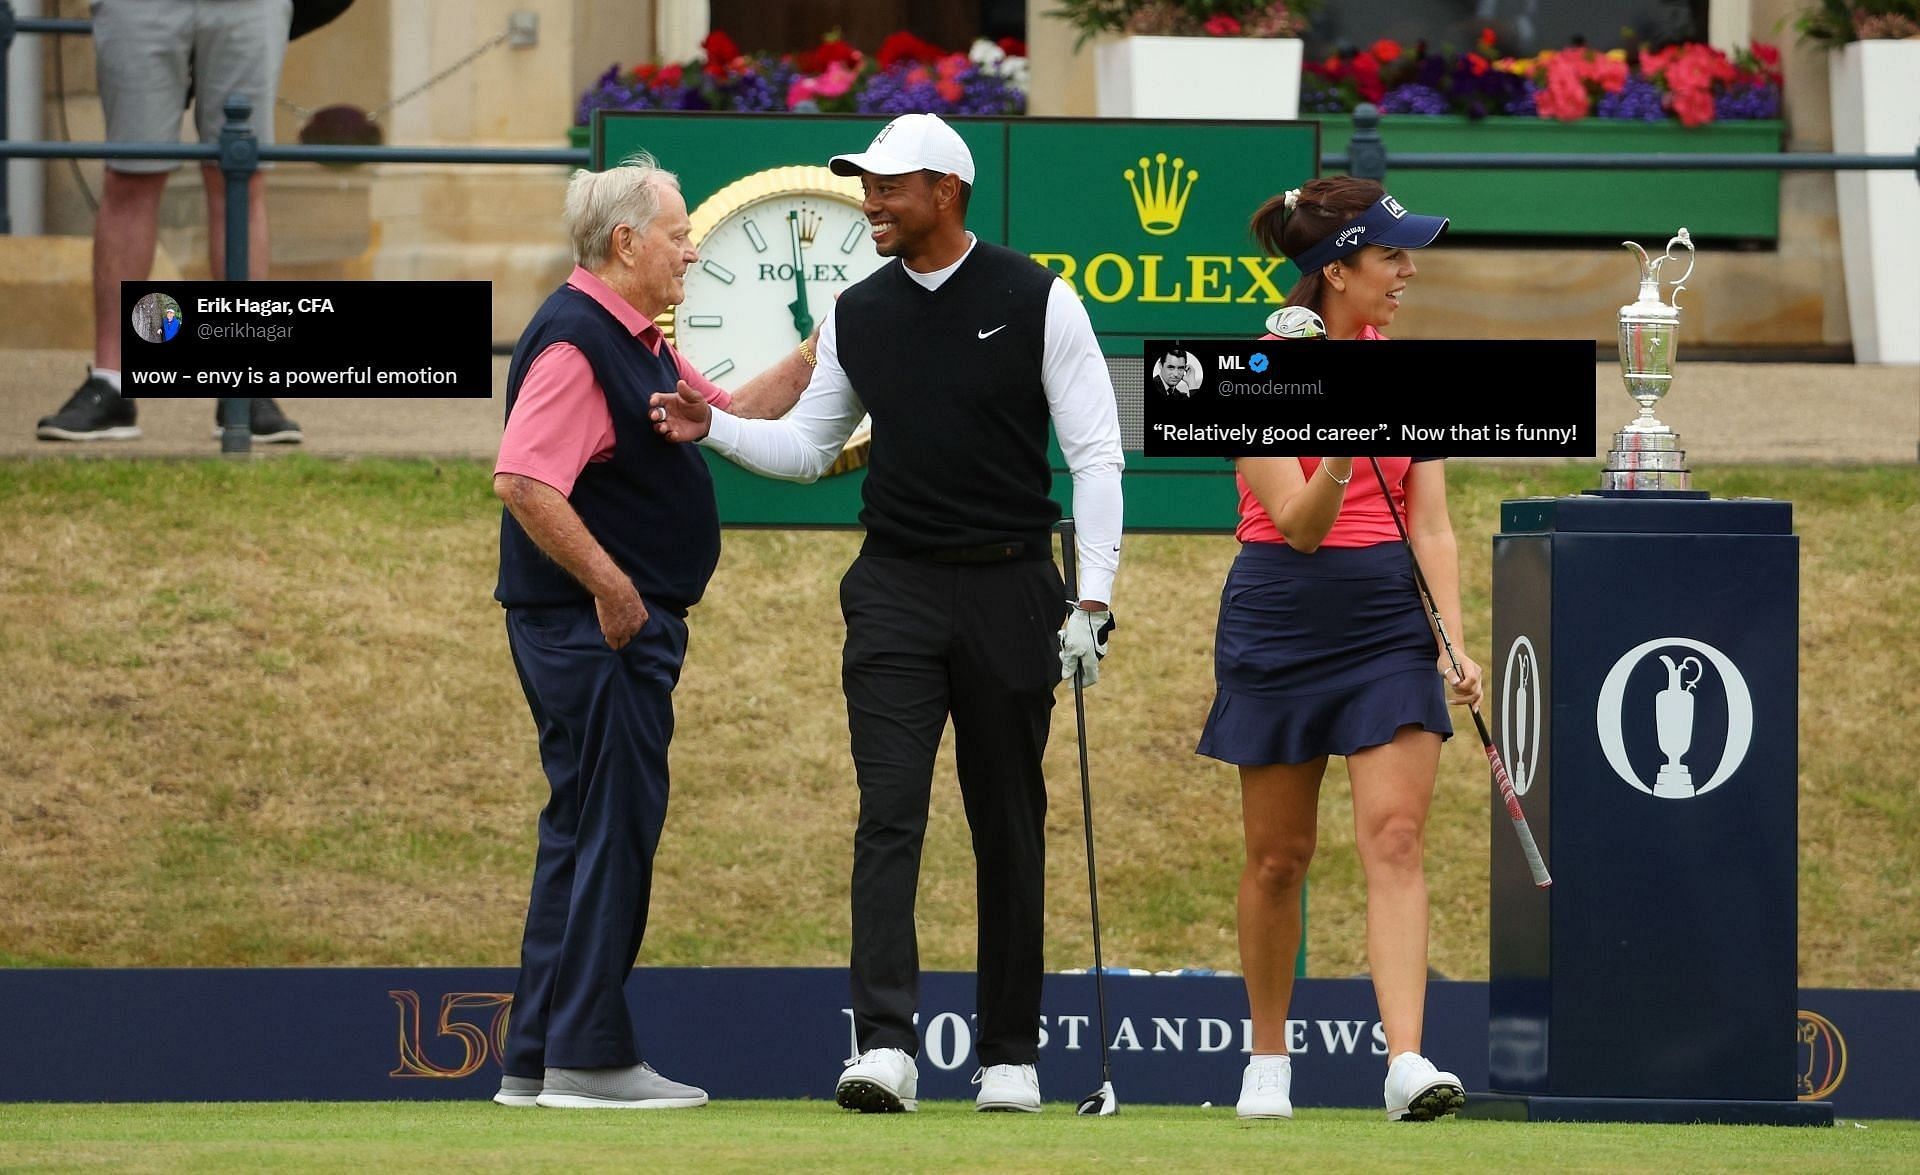 Jack Nicklaus and Tiger Woods at the 150th Open Championship in 2019